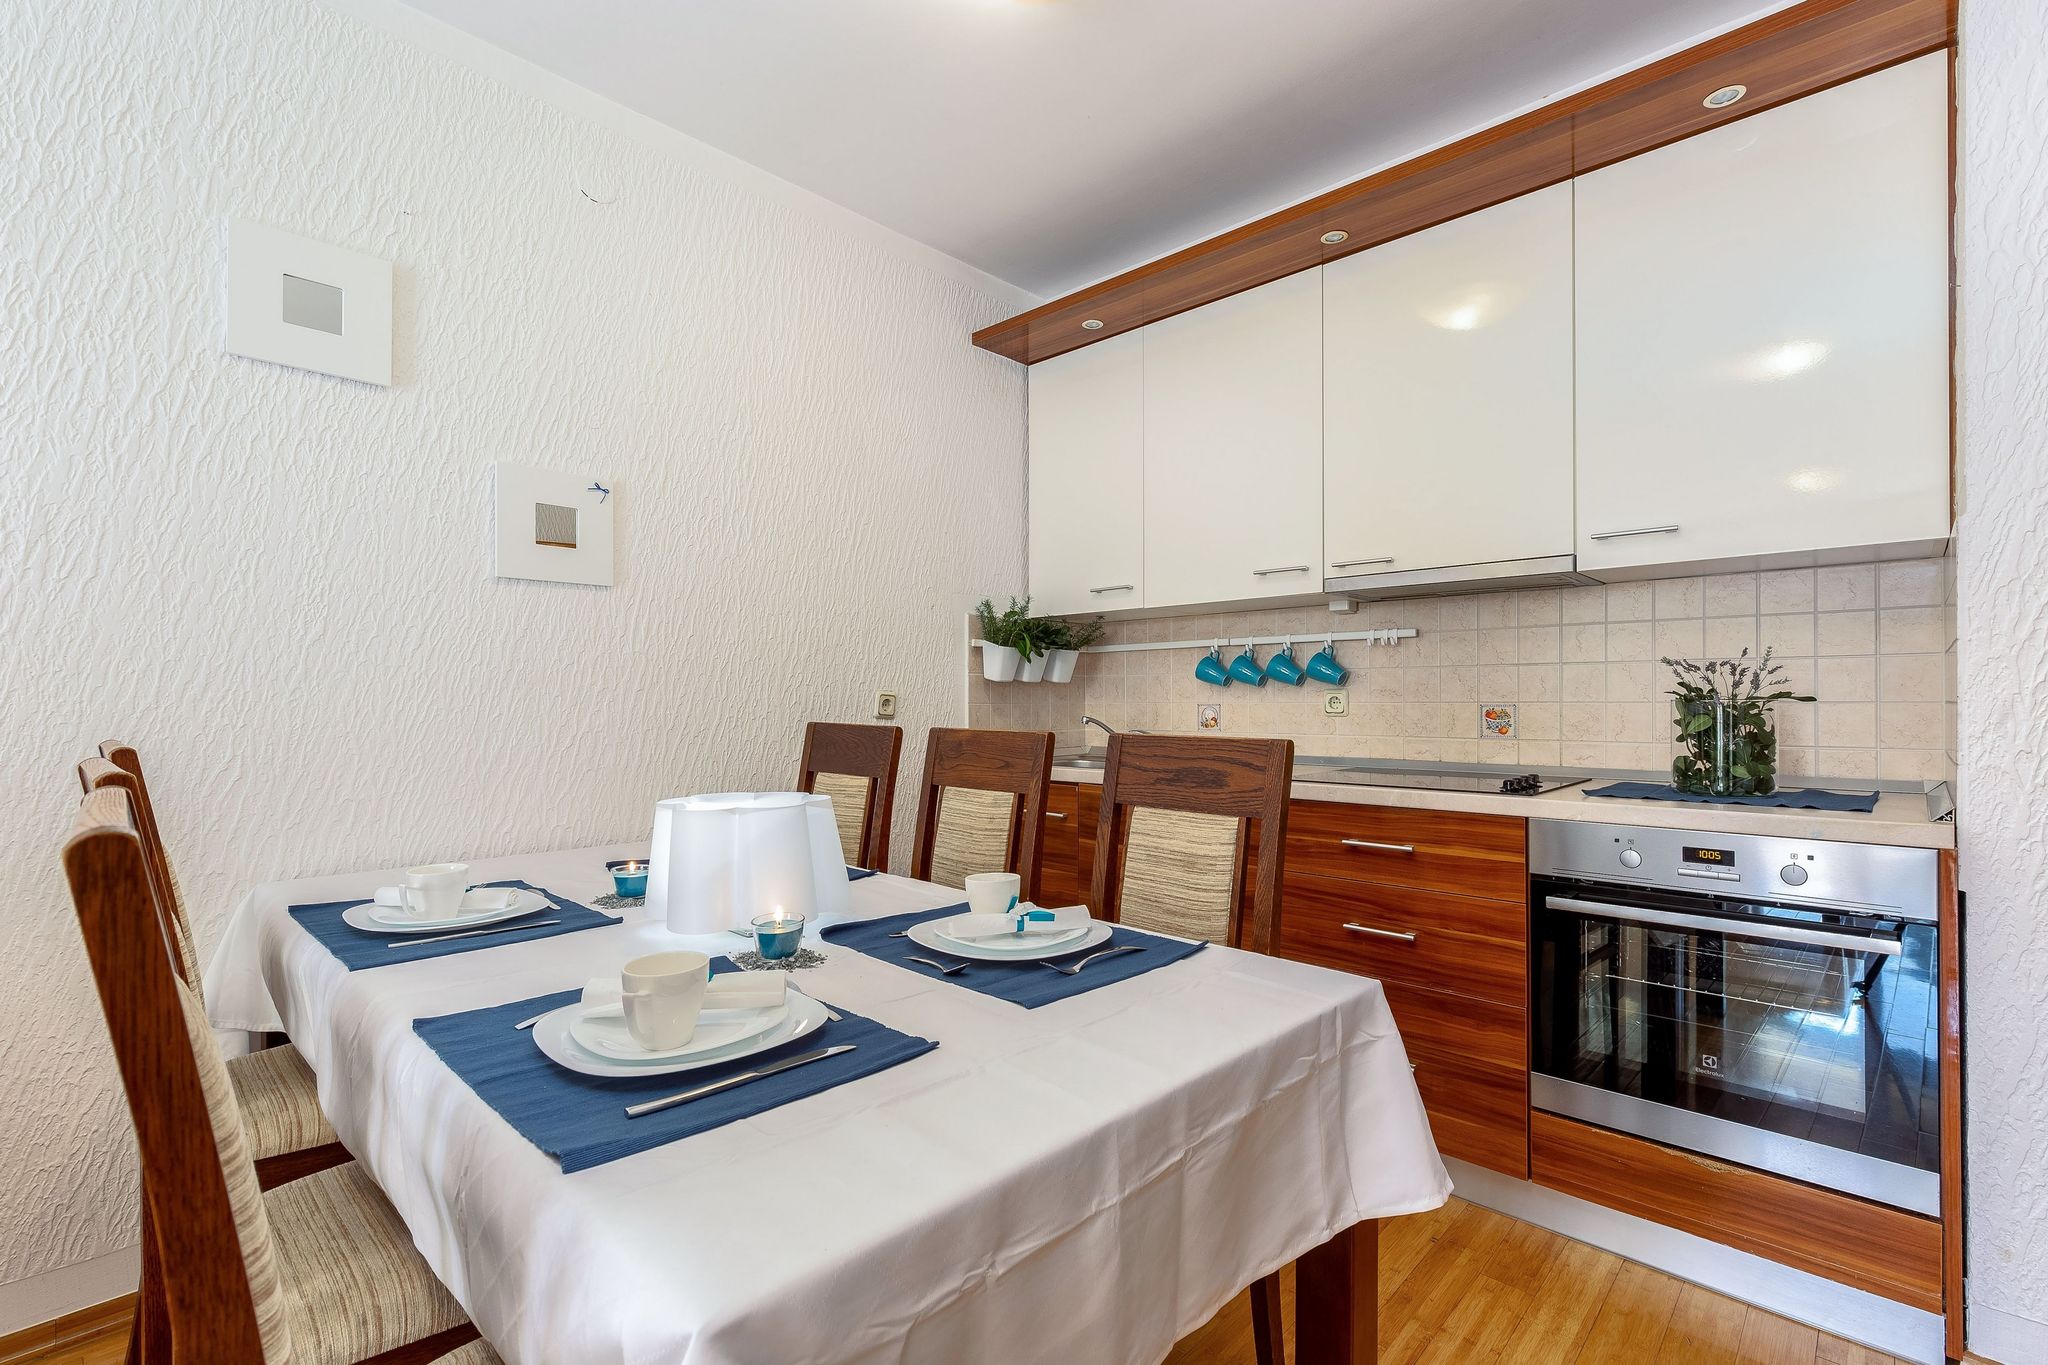 Lovely apartment in Crikvenica with roofed terrace